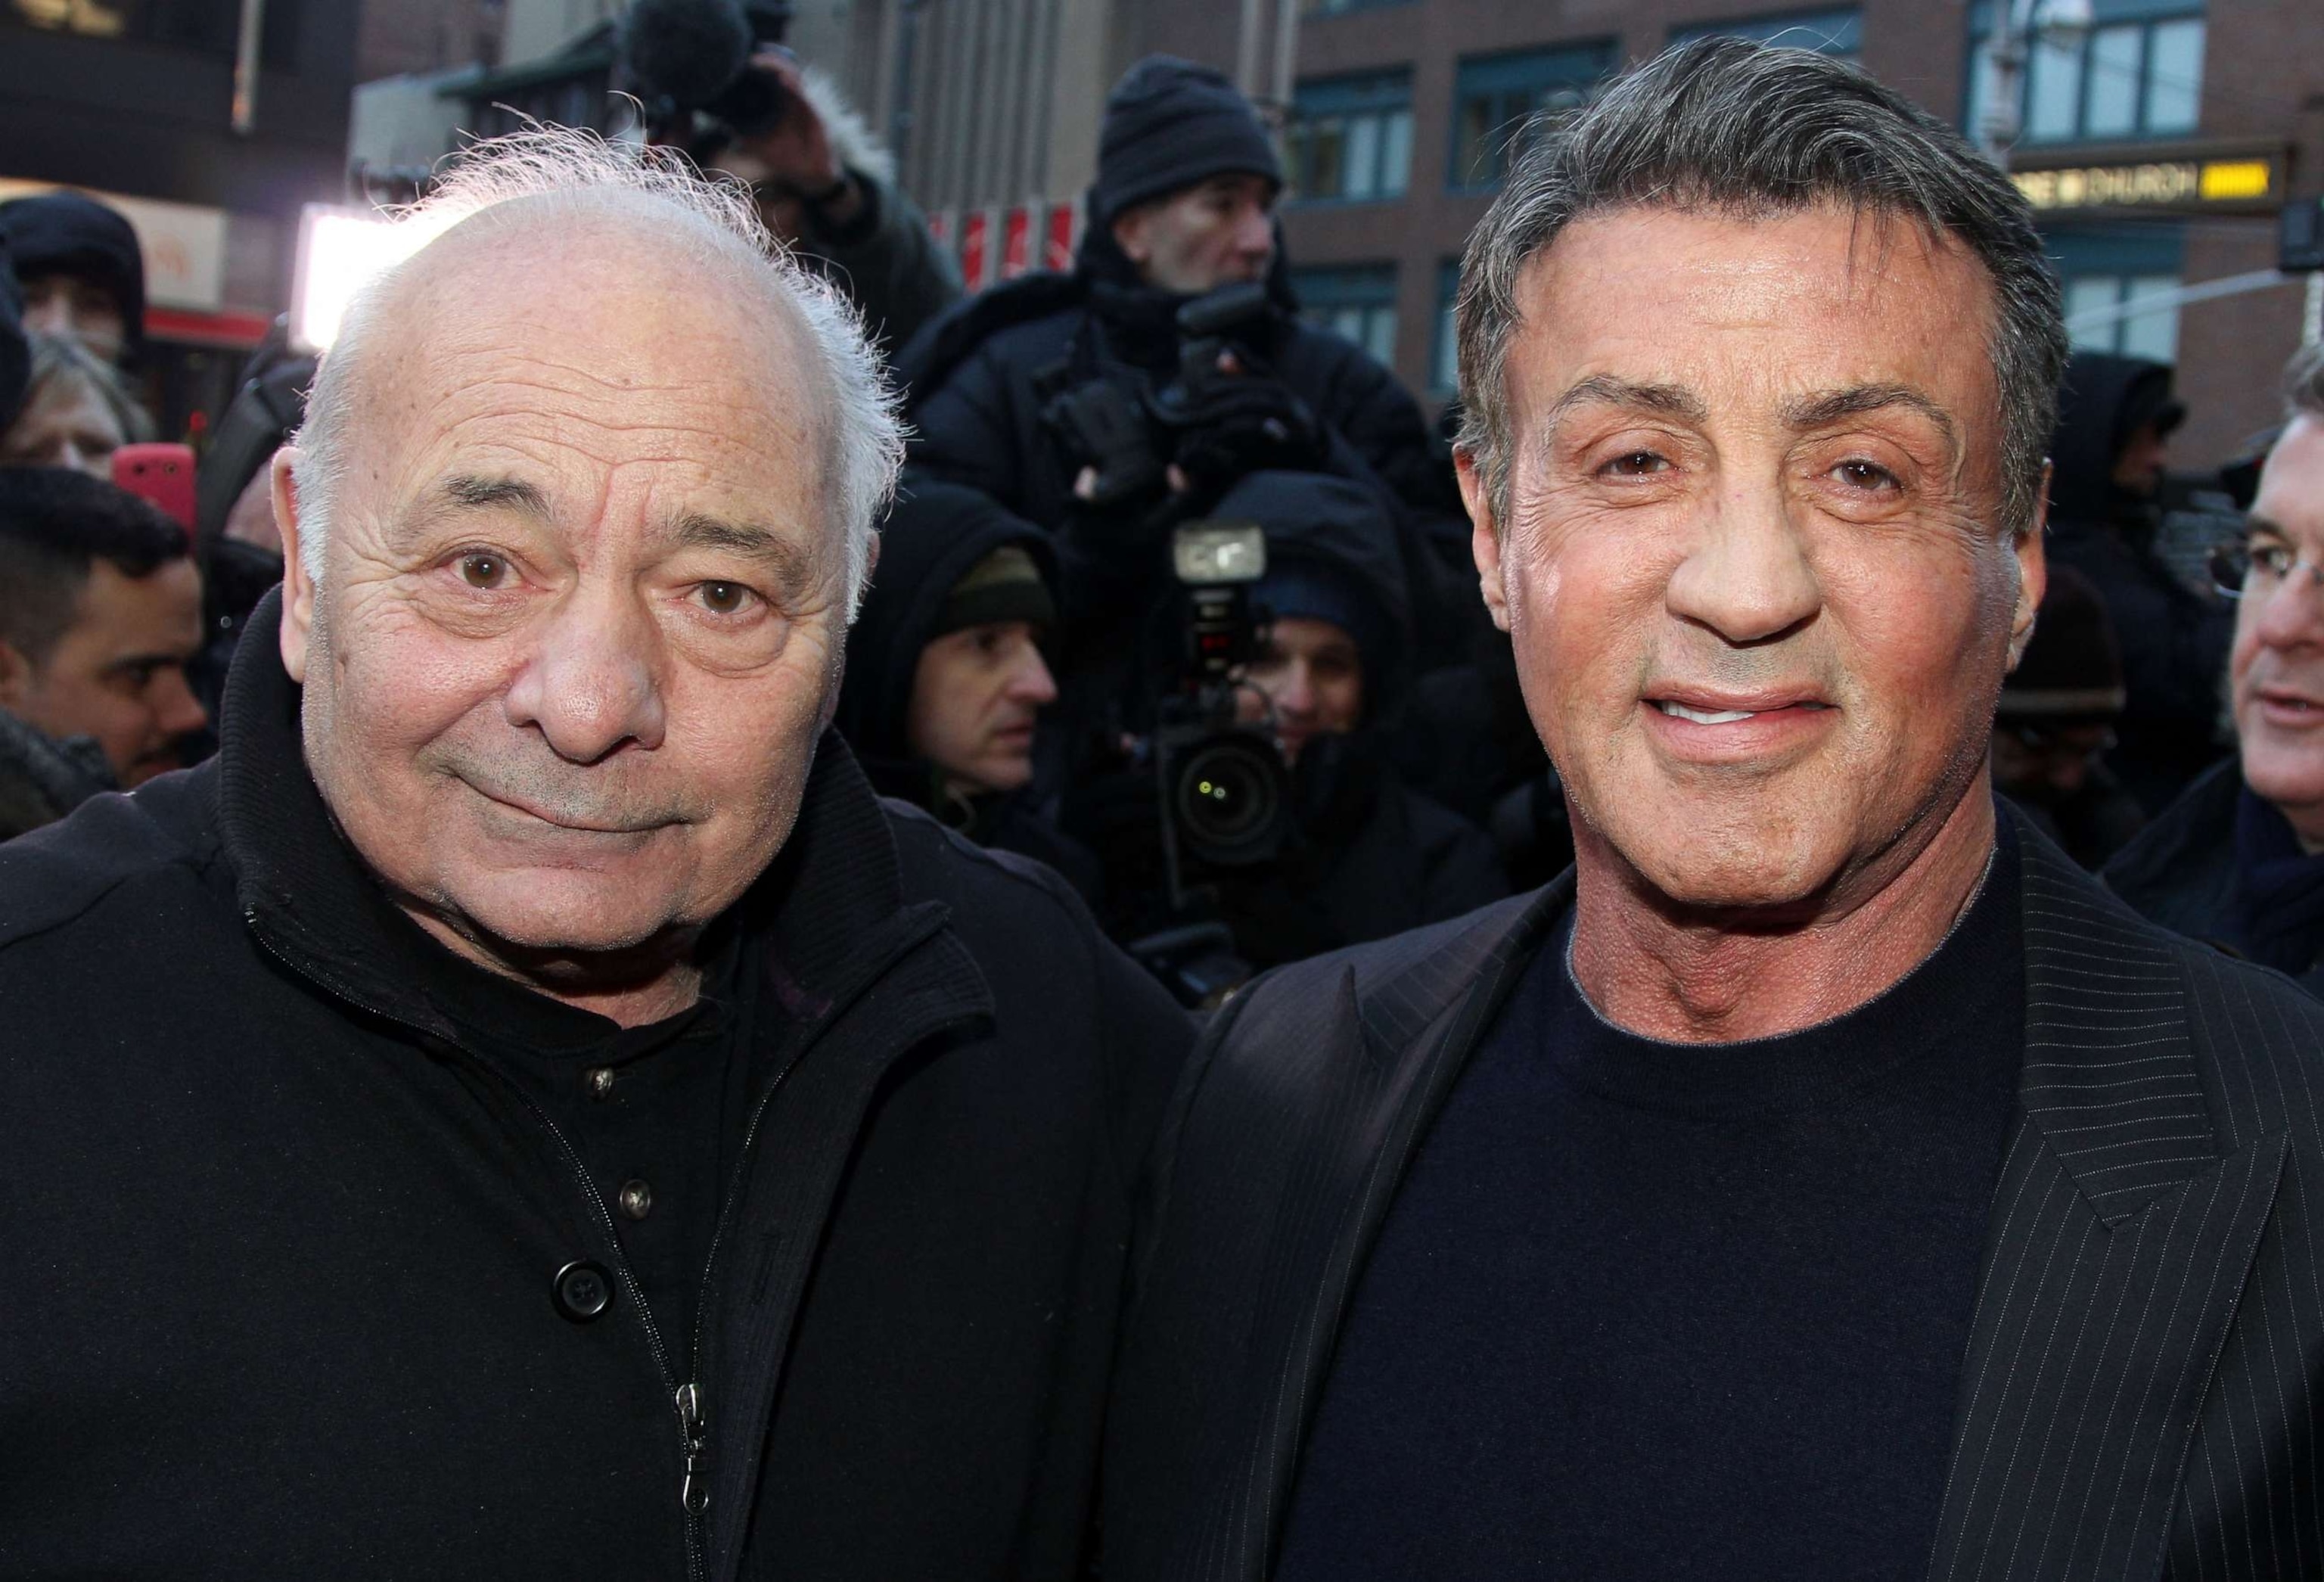 PHOTO: Burt Young and Sylvester Stallone attend the "Rocky" Broadway opening night at The Winter Garden Theatre on March 13, 2014 in New York City. (Photo by Bruce Glikas/FilmMagic)